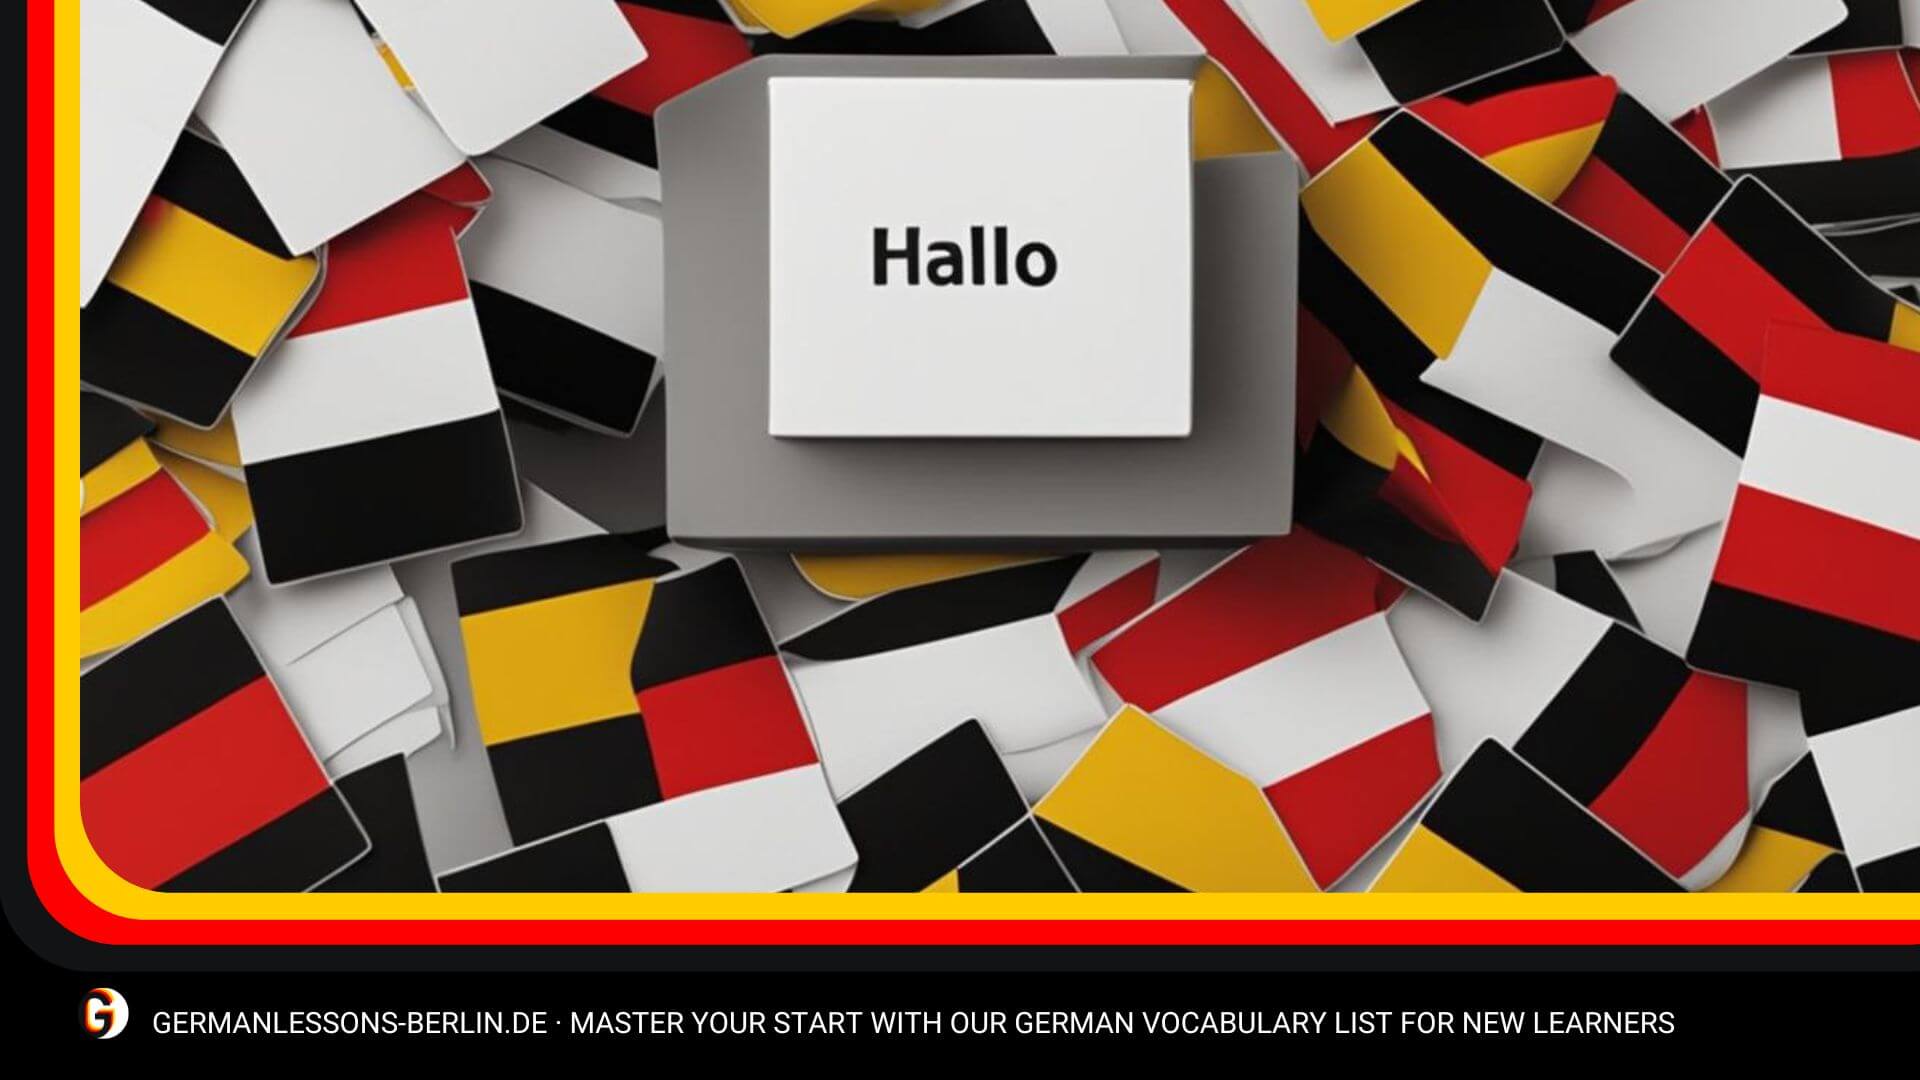 Master Your Start with Our German Vocabulary List for New Learners